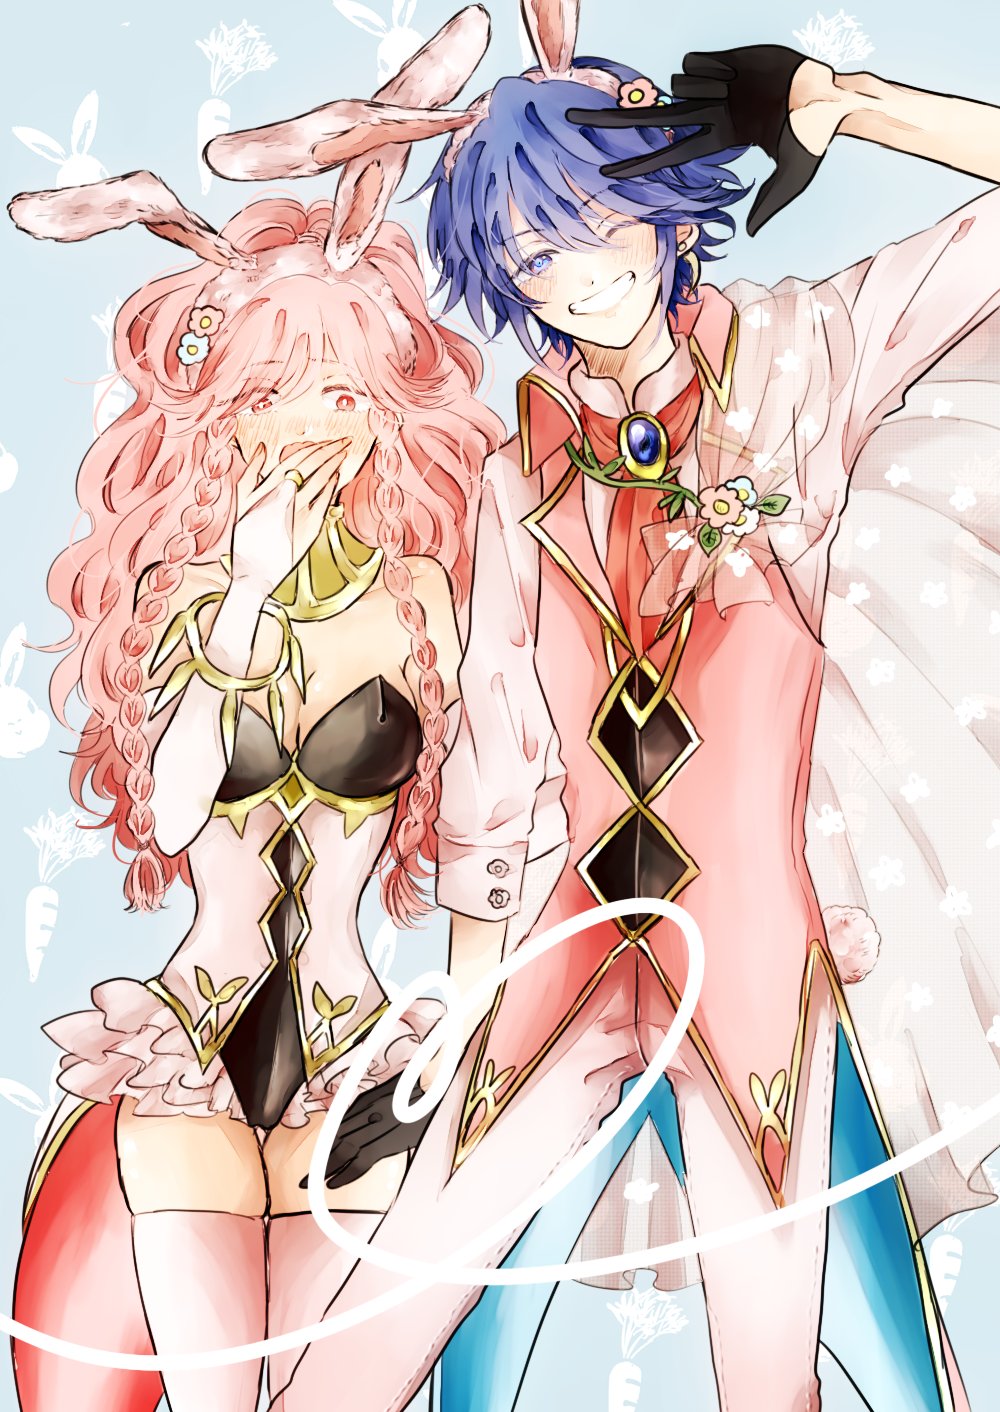 1boy 1girl animal_ears azur_(fire_emblem) blue_hair embarrassed fire_emblem fire_emblem:_kakusei fire_emblem_heroes fire_emblem_if gloves hand_holding highres looking_at_viewer mother_and_son olivia_(fire_emblem) pink_hair rabbit_ears smile